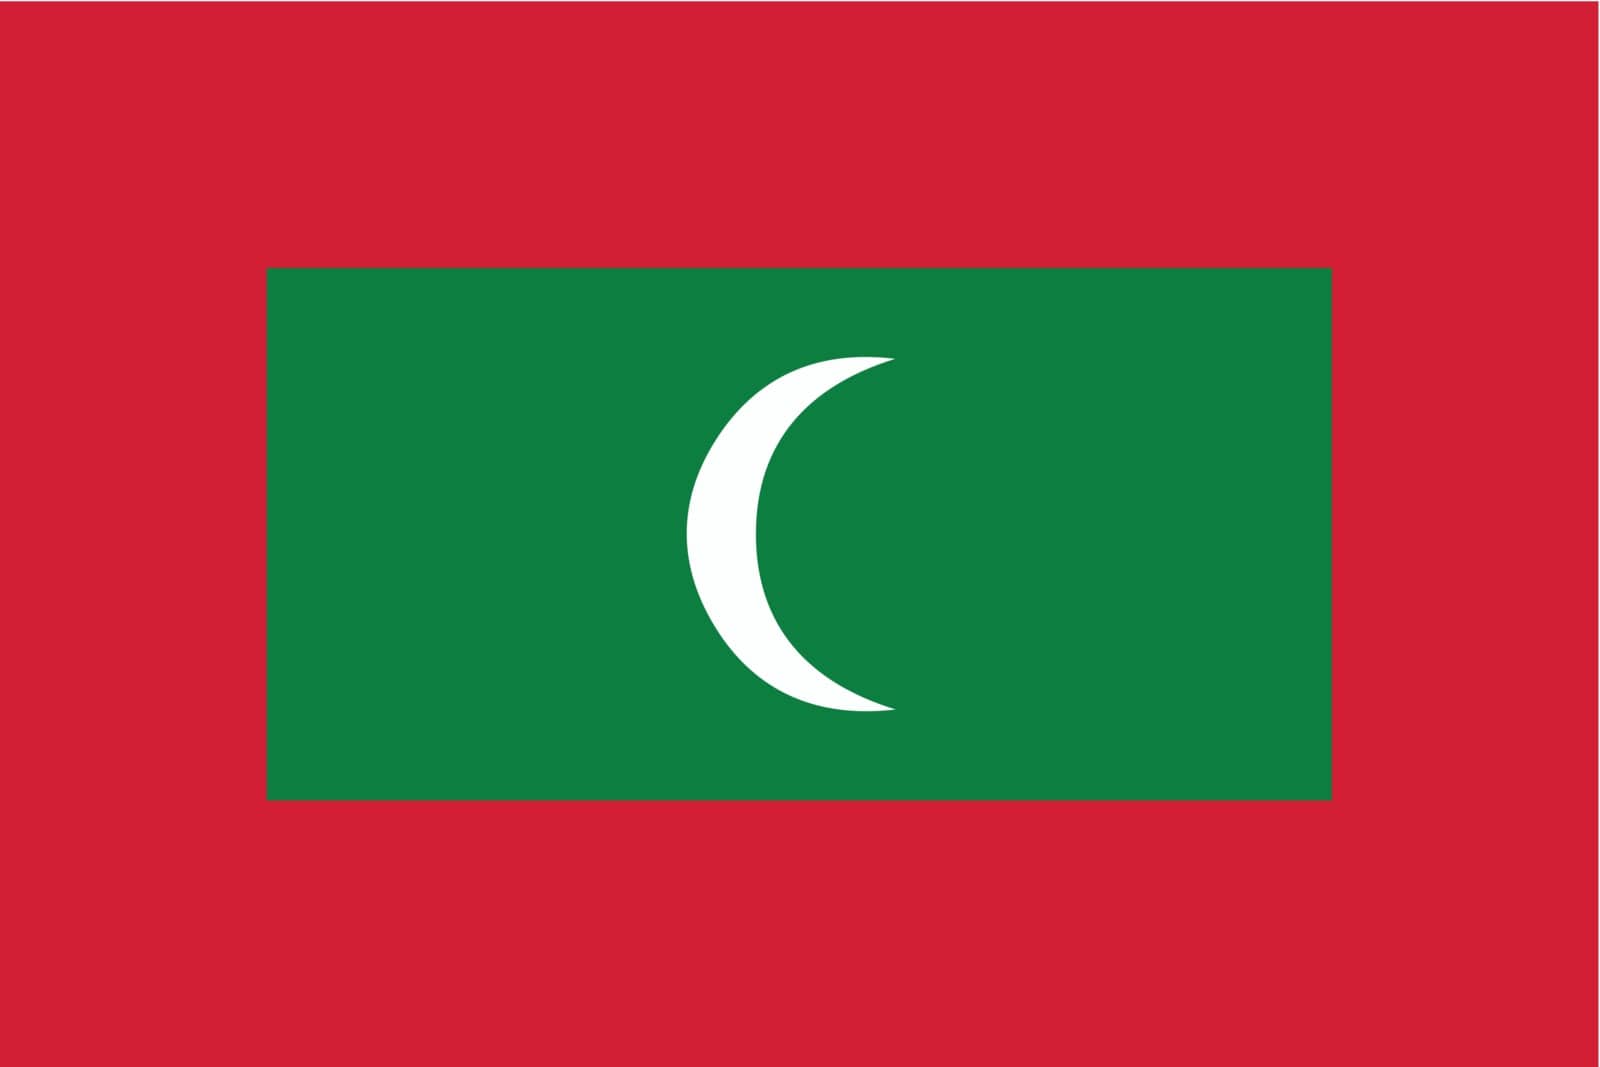 The national flag of the Maldives